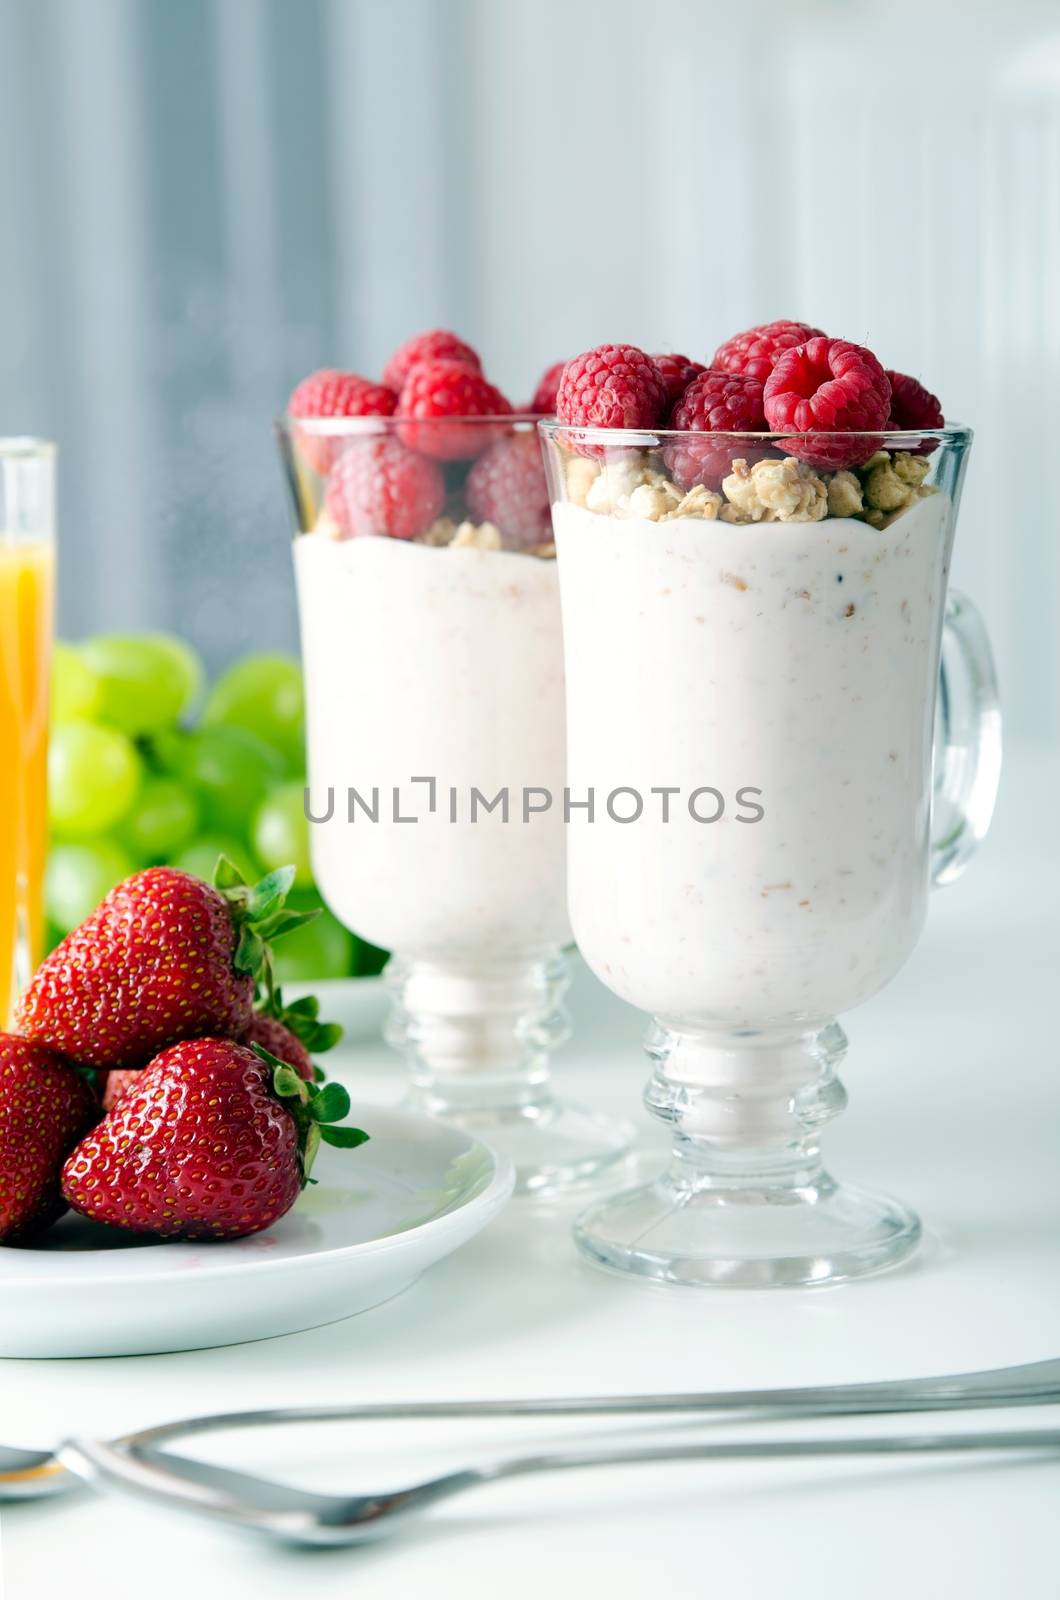 Glass of dessert with fresh berries, muesli and yoghurt on table